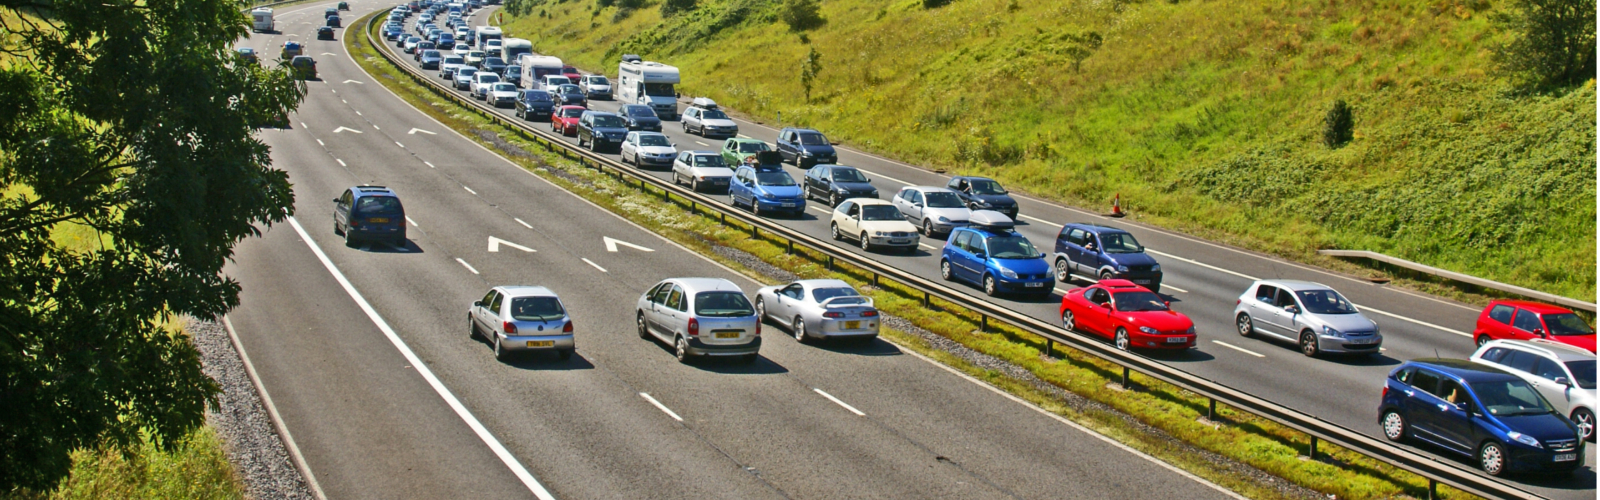 Cars on a motorway on a sunny day